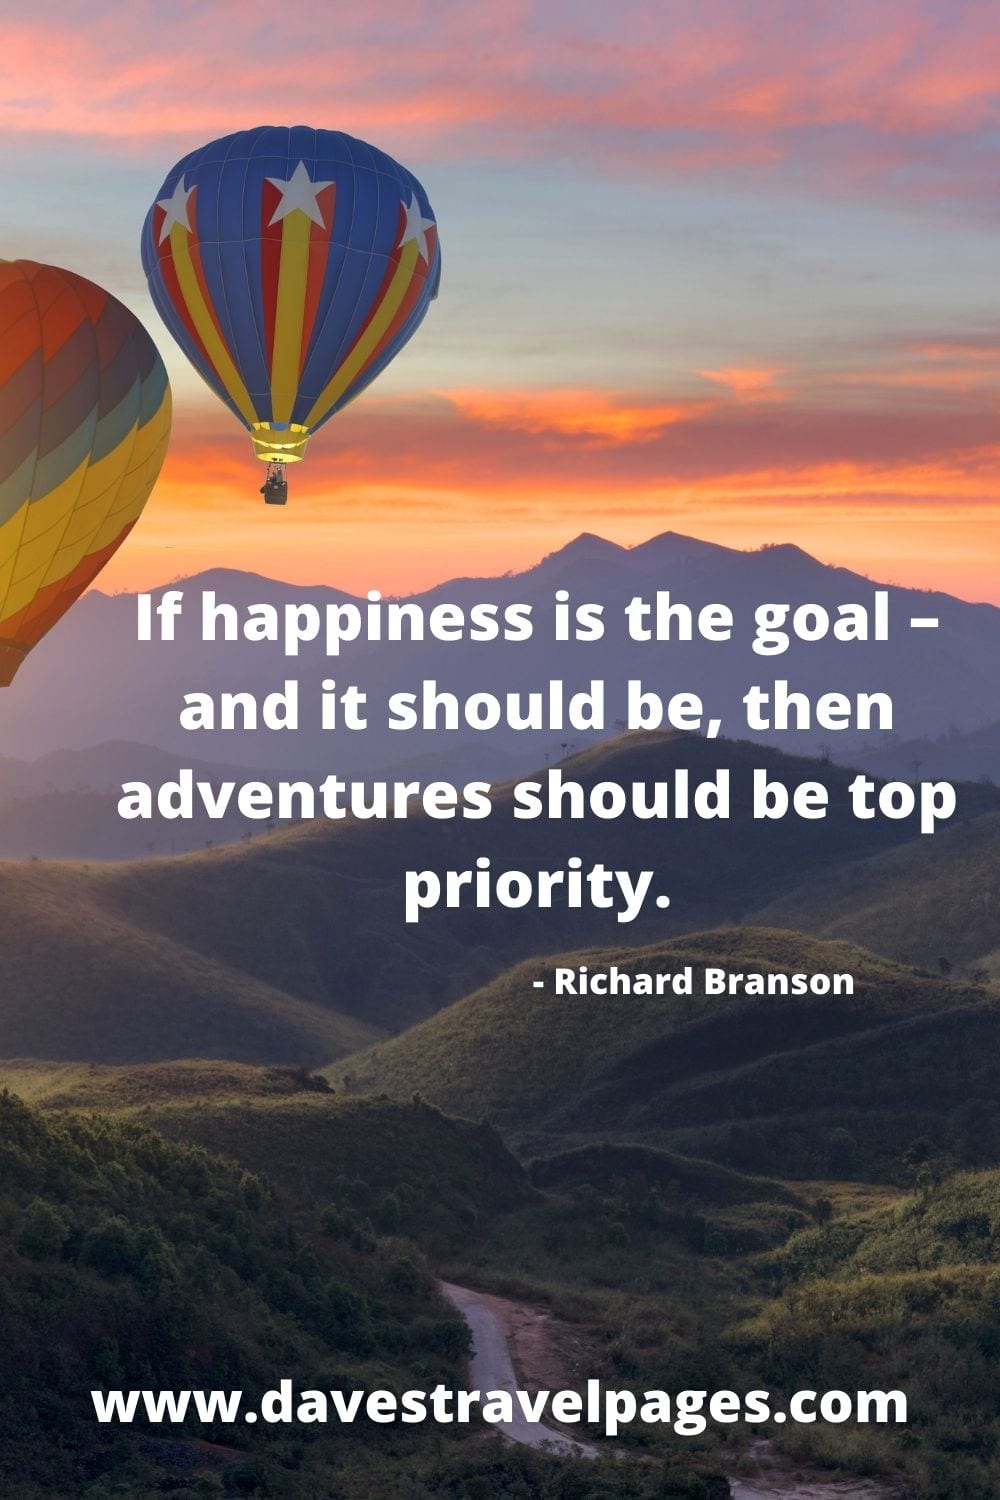 If happiness is the goal – and it should be, then adventures should be top priority. - Richard Branson